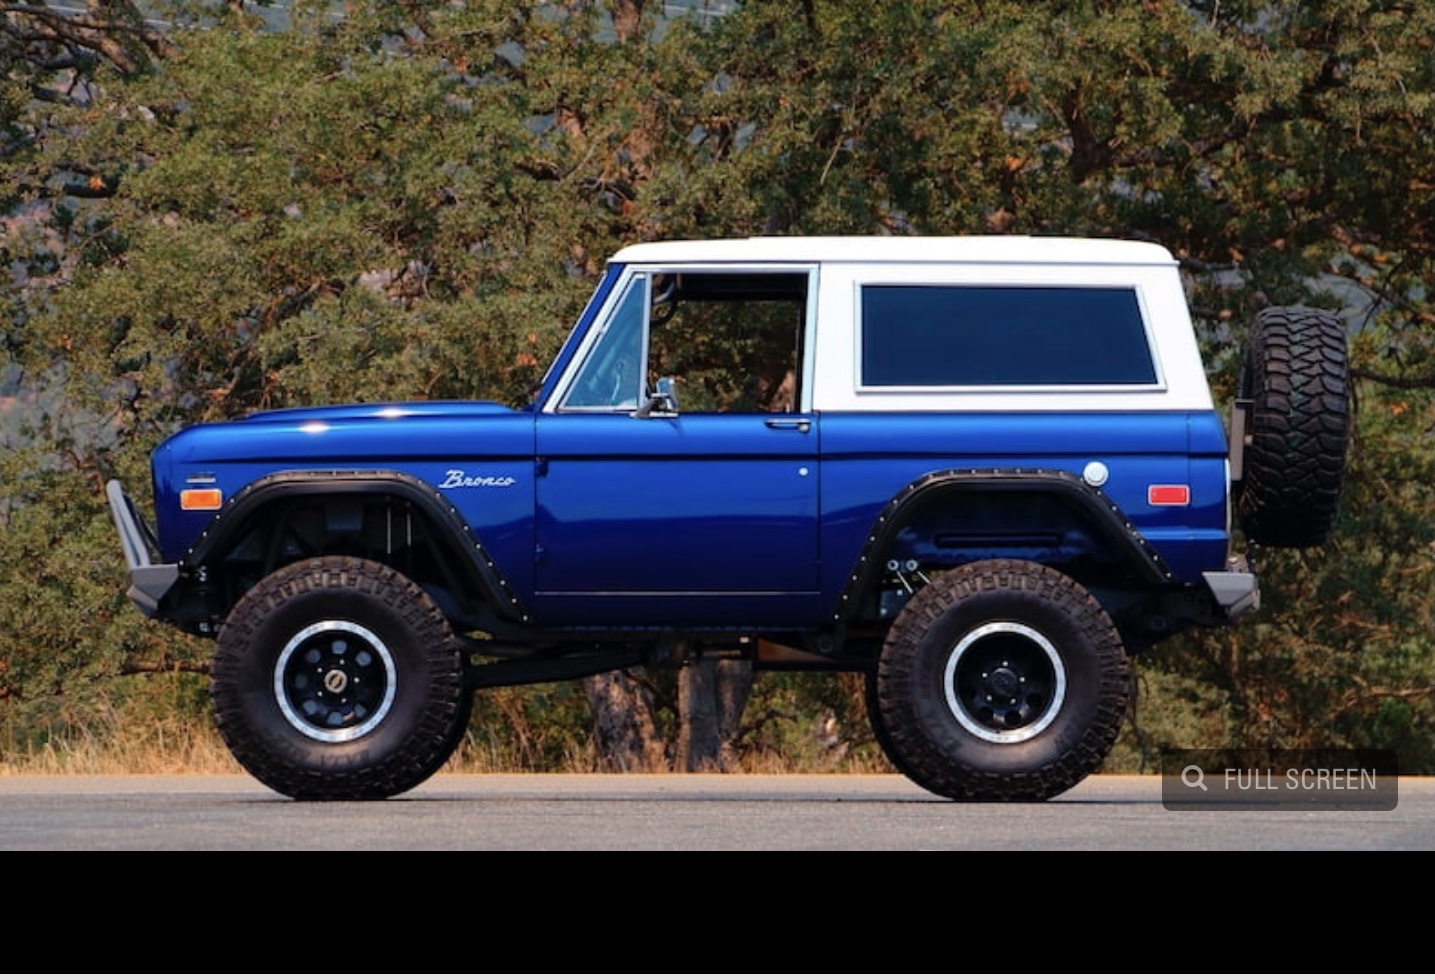 Ford Bronco Color Decision for my Base 2 DR? 502ED5B9-9CAD-4578-B1AD-C3BA76A9B5EF